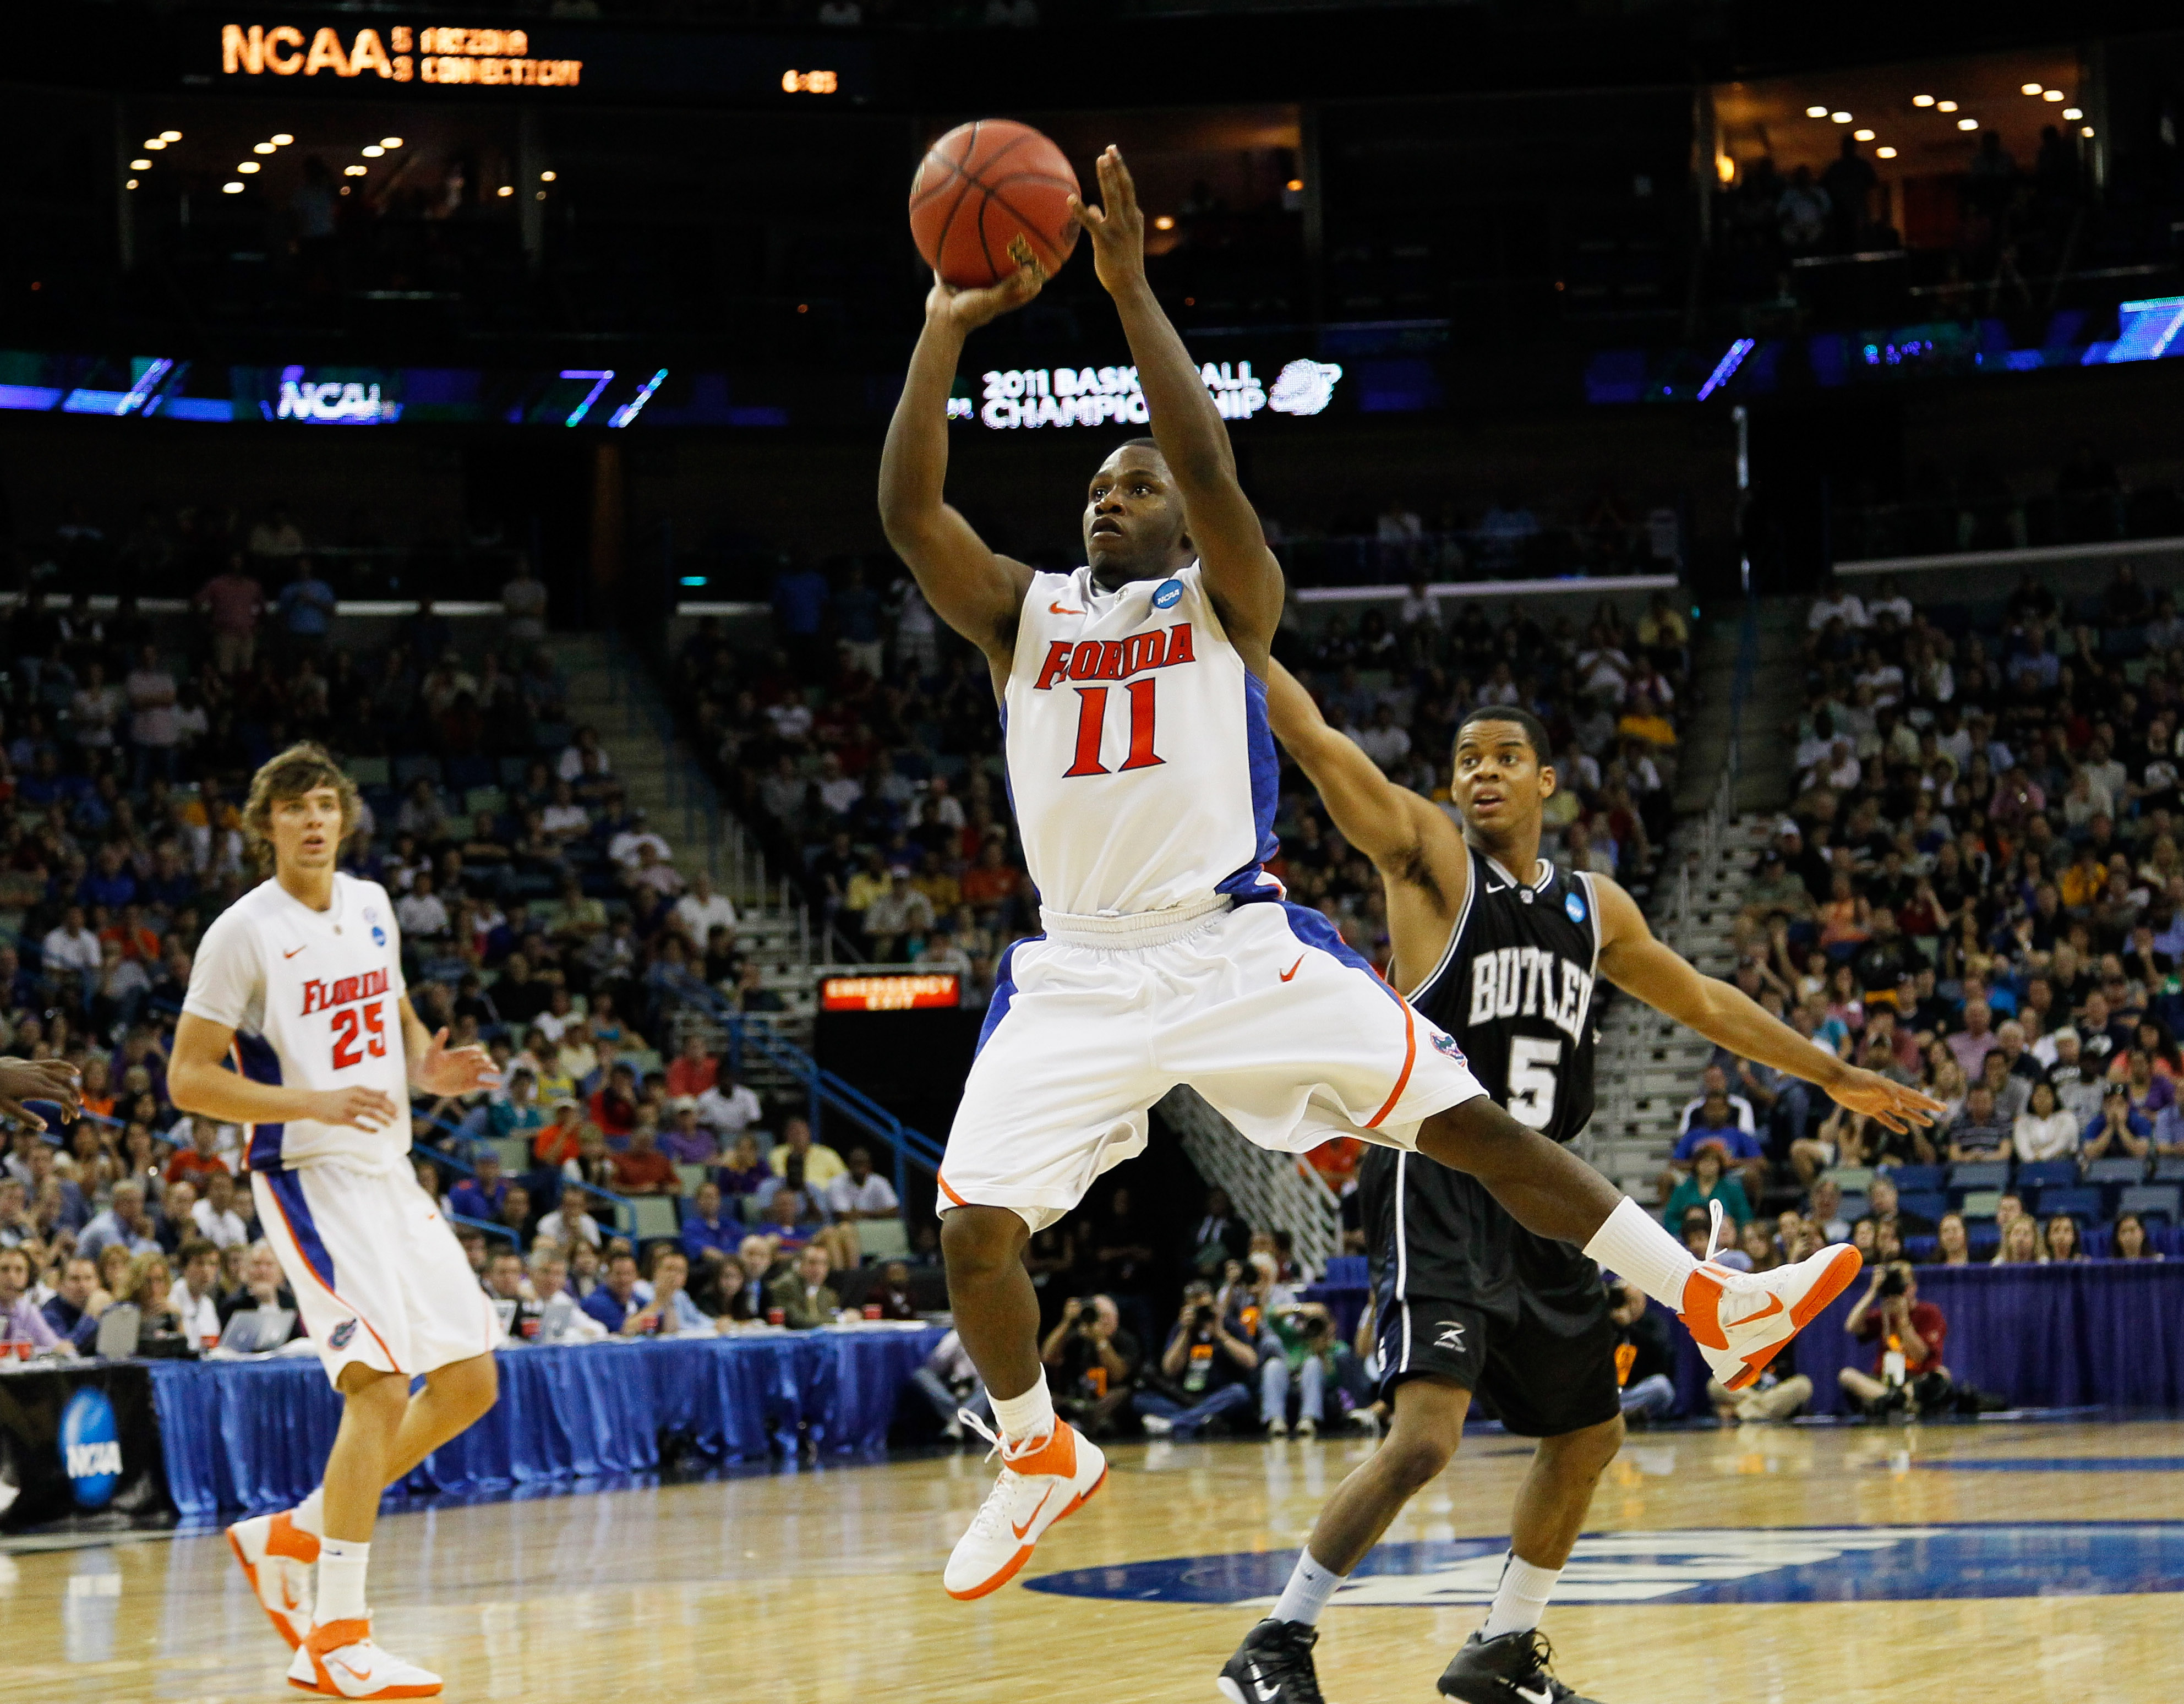 NEW ORLEANS, LA - MARCH 26:  Erving Walker #11 of the Florida Gators shoots against the Butler Bulldogs during the Southeast regional final of the 2011 NCAA men's basketball tournament at New Orleans Arena on March 26, 2011 in New Orleans, Louisiana.  (Ph